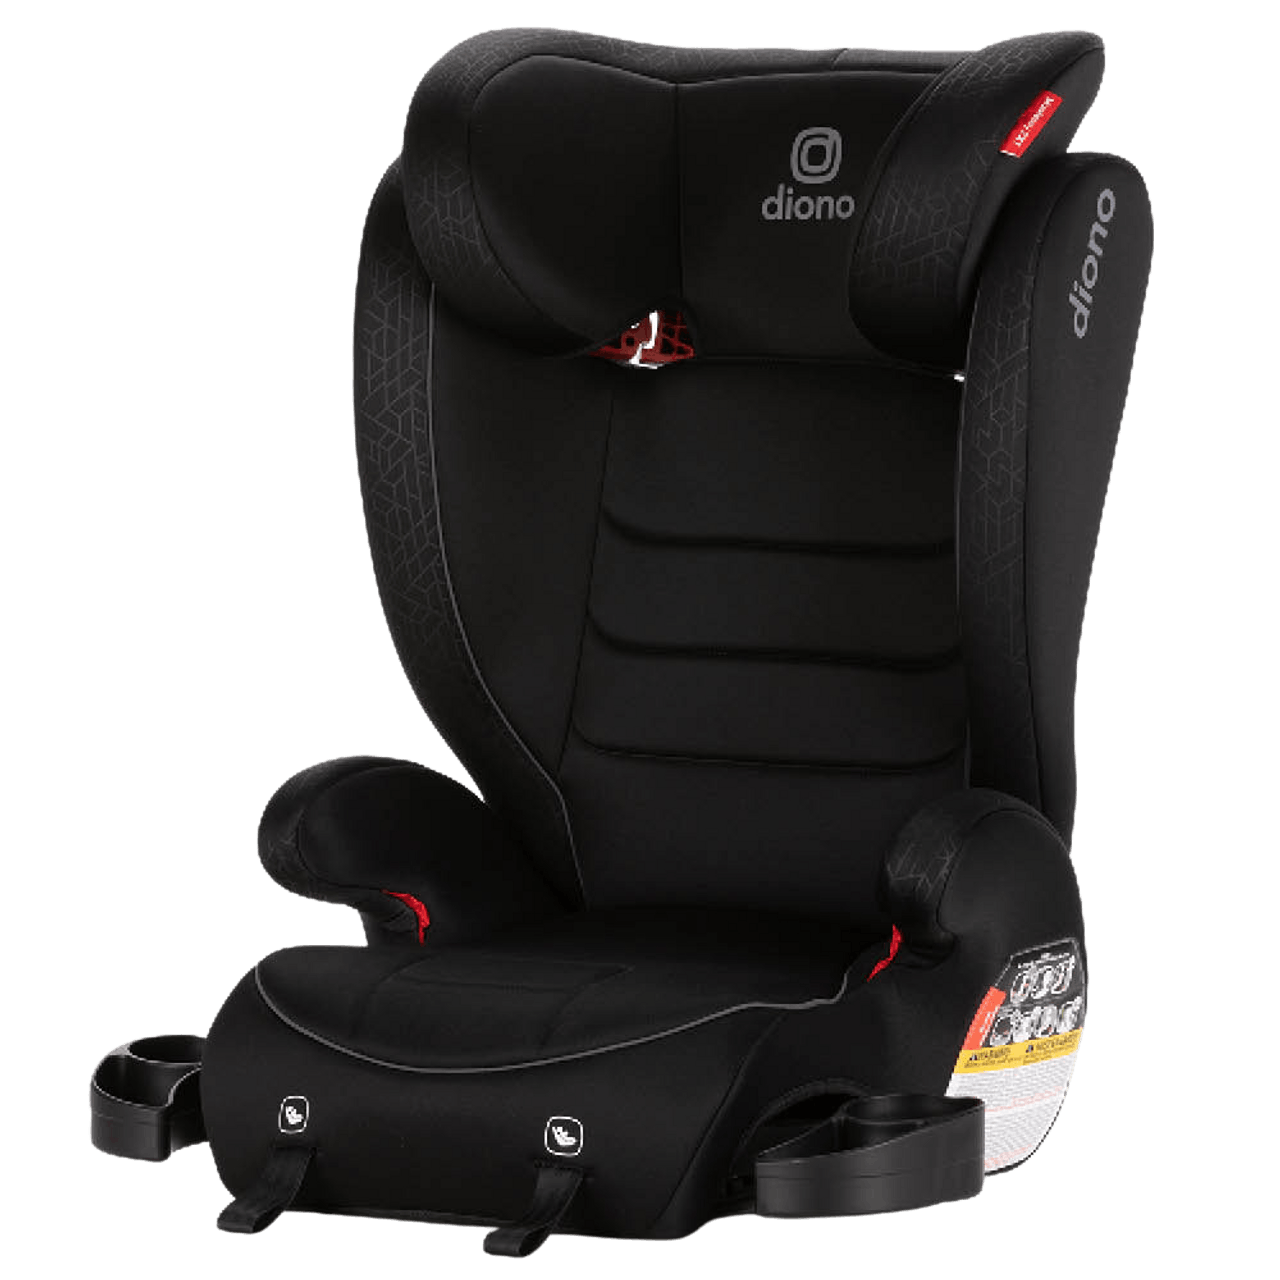 Diono Monterey® 2XT Latch 2-in-1 Booster Car Seat